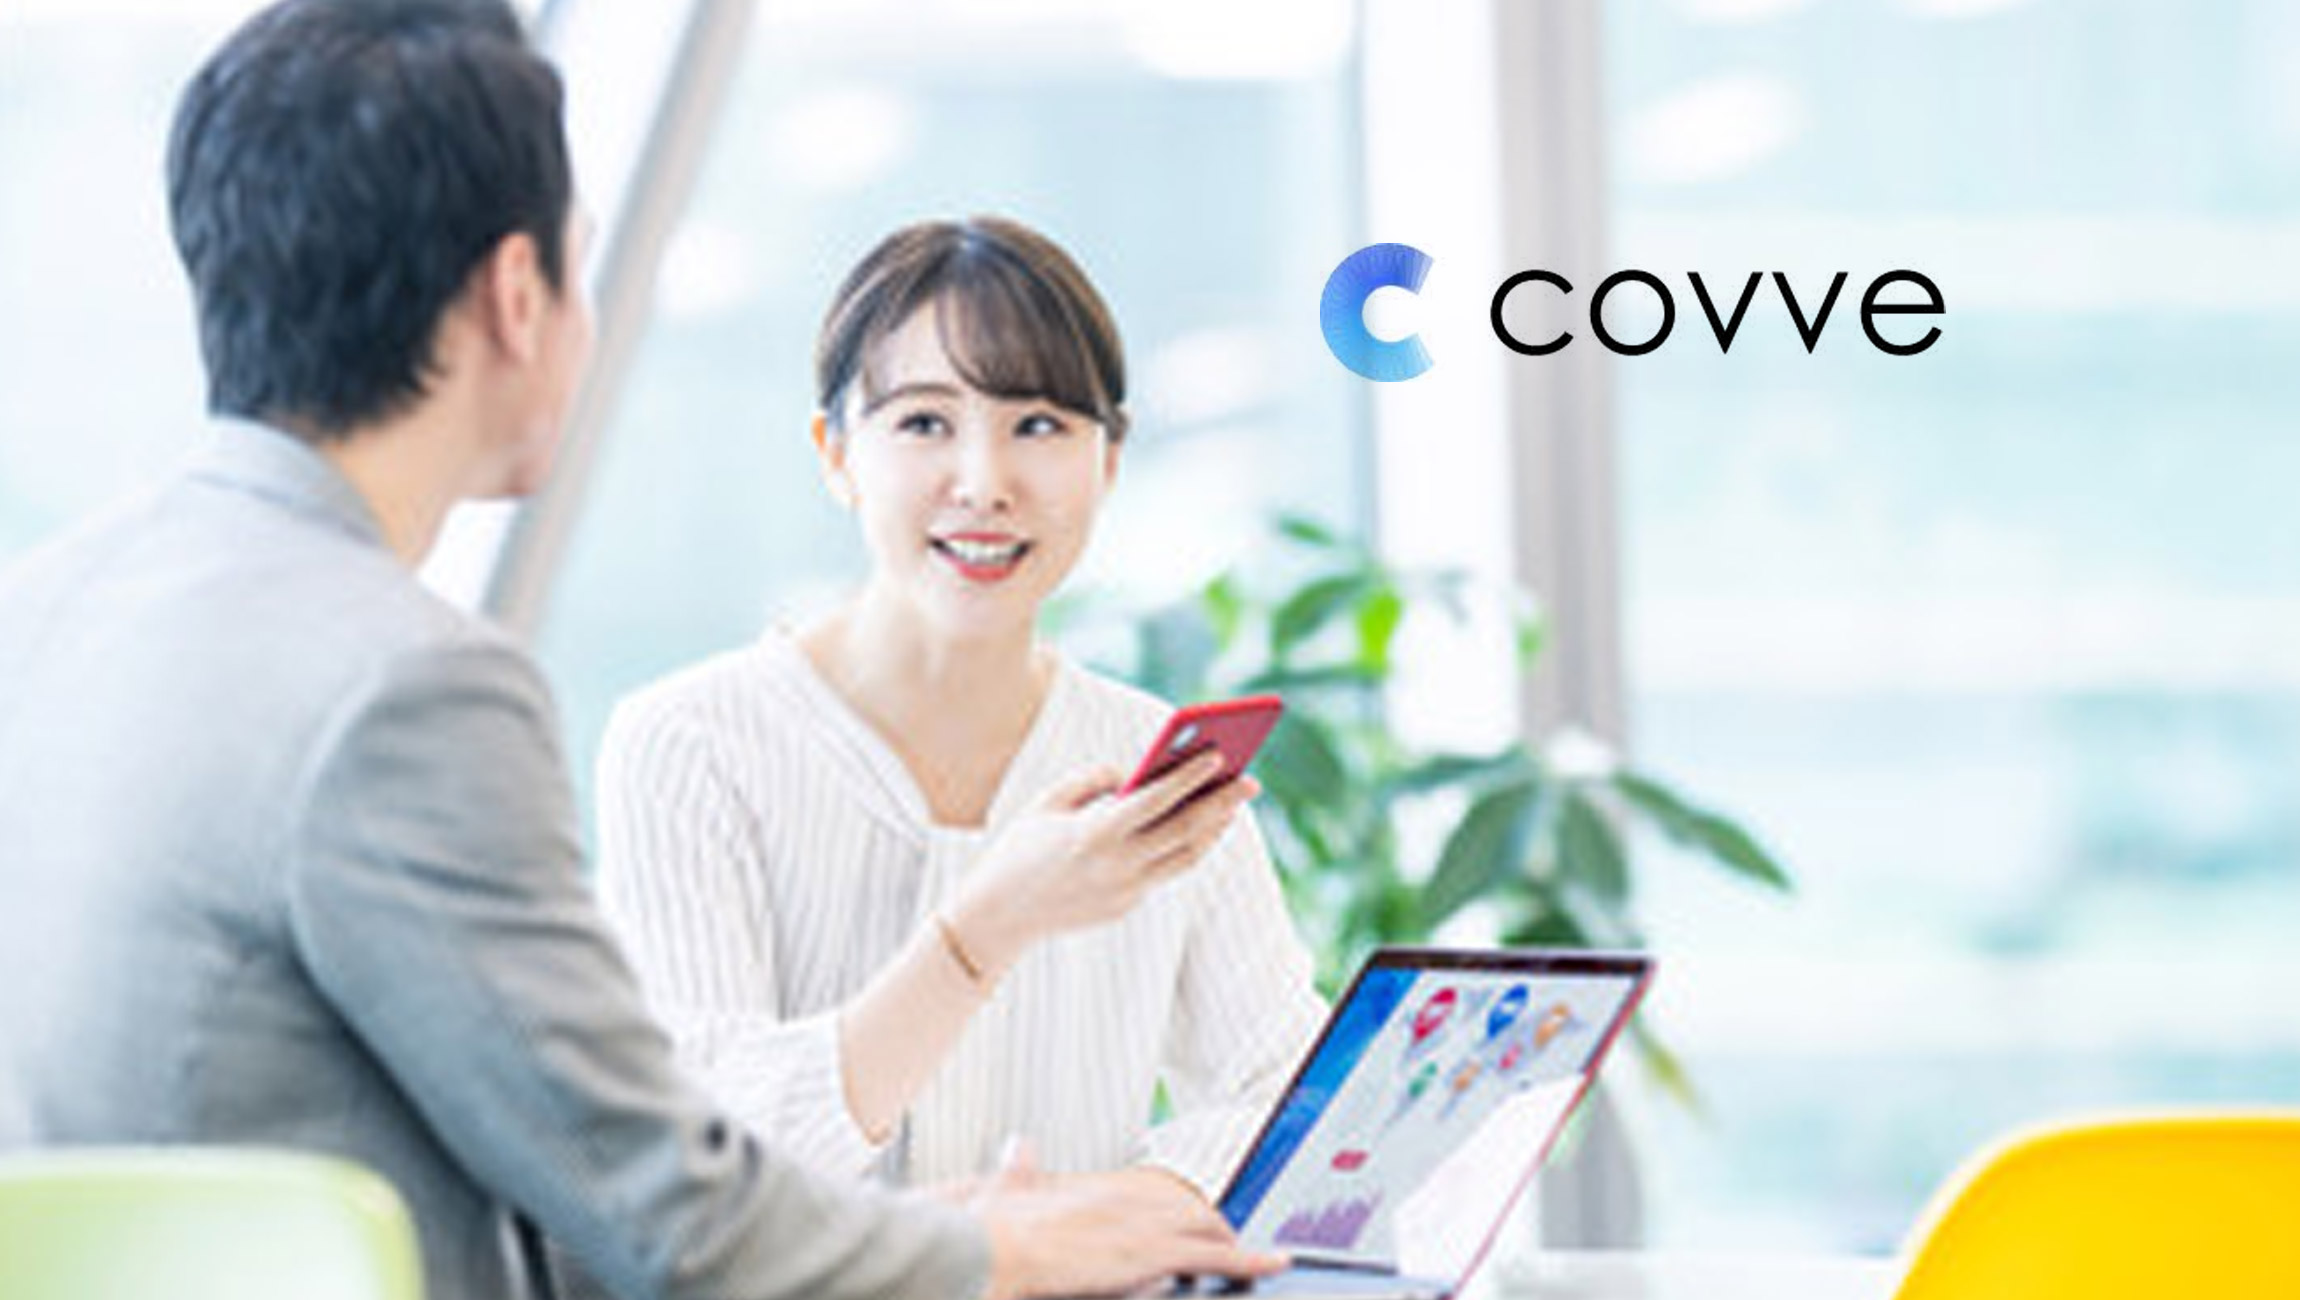 New Study Finds AI-Powered Business Card Scanner Covve Has the Speed and Accuracy Needed for Us to Finally Have Paperless Meetings